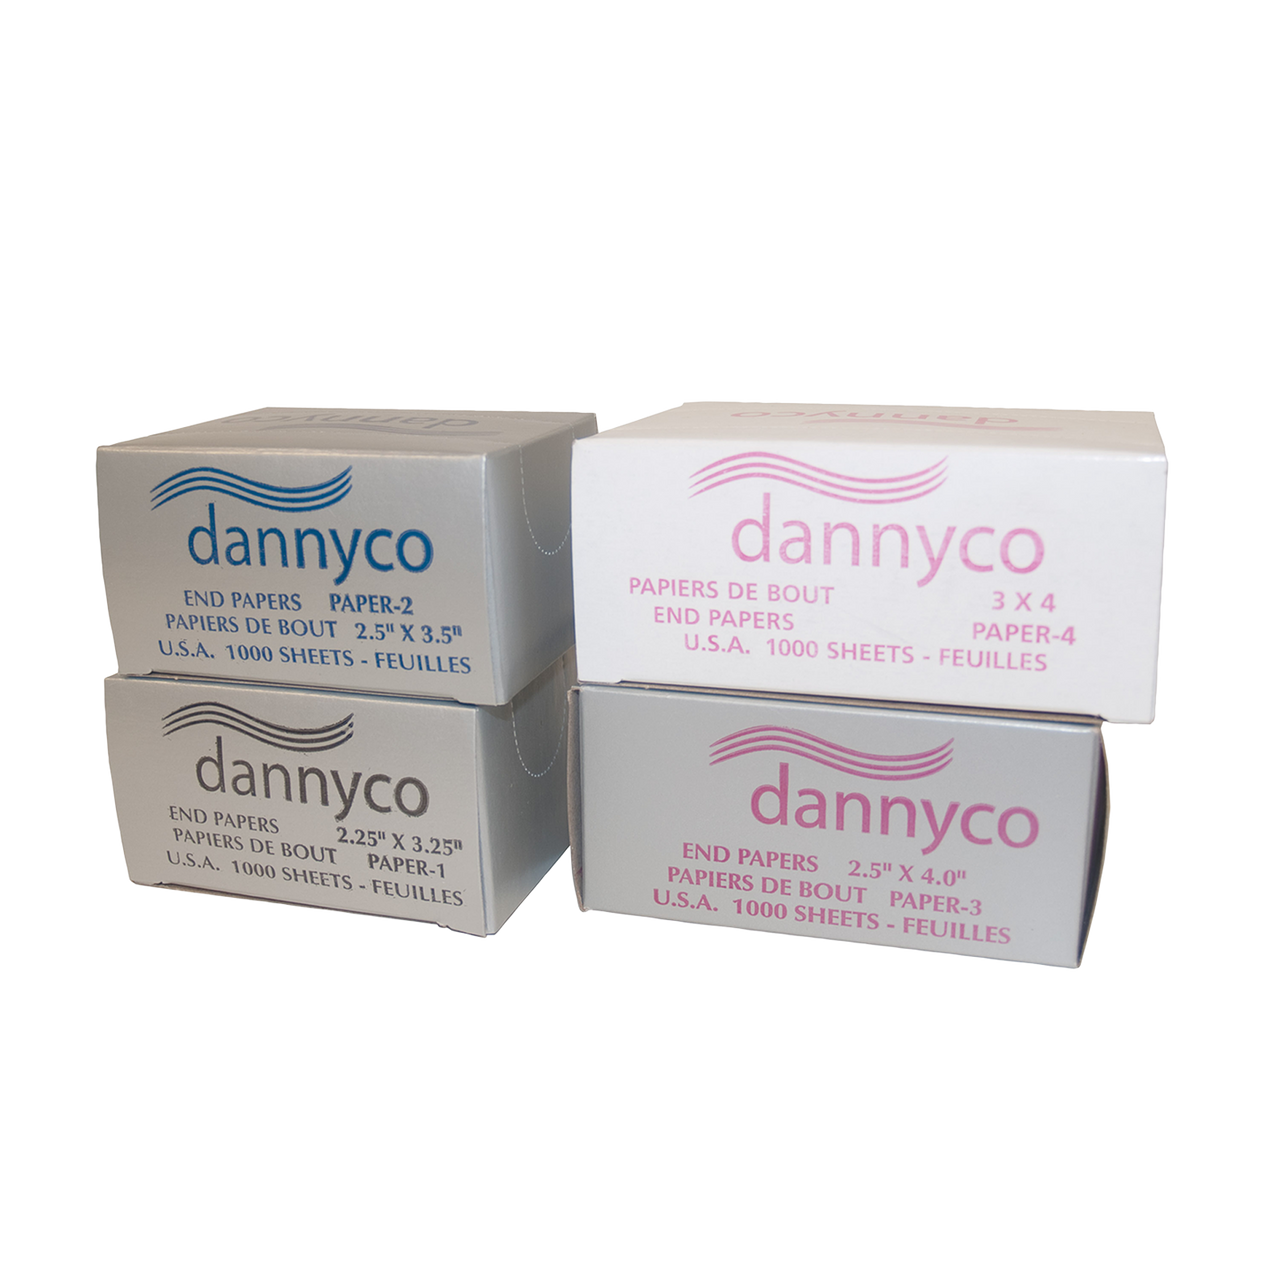 Dannyco Sundries End Wraps 2 1/2 Inch x 4 Inch 1 Box